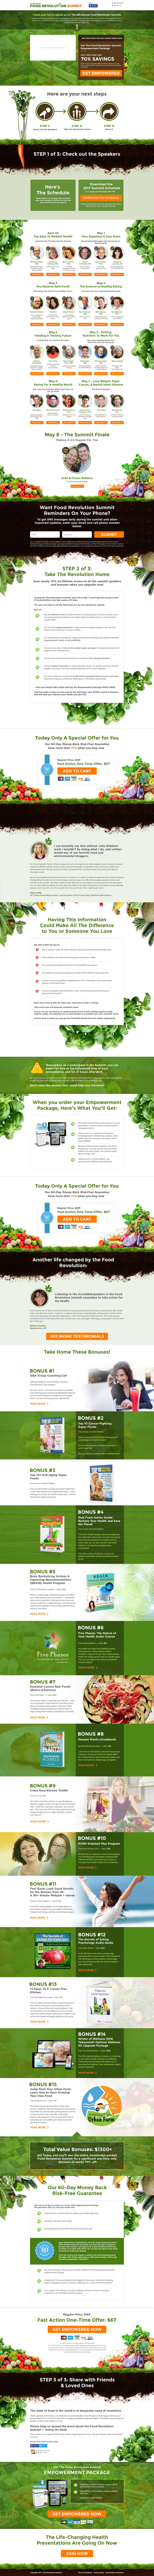 The Food Revolution Summit Squeeze Pages